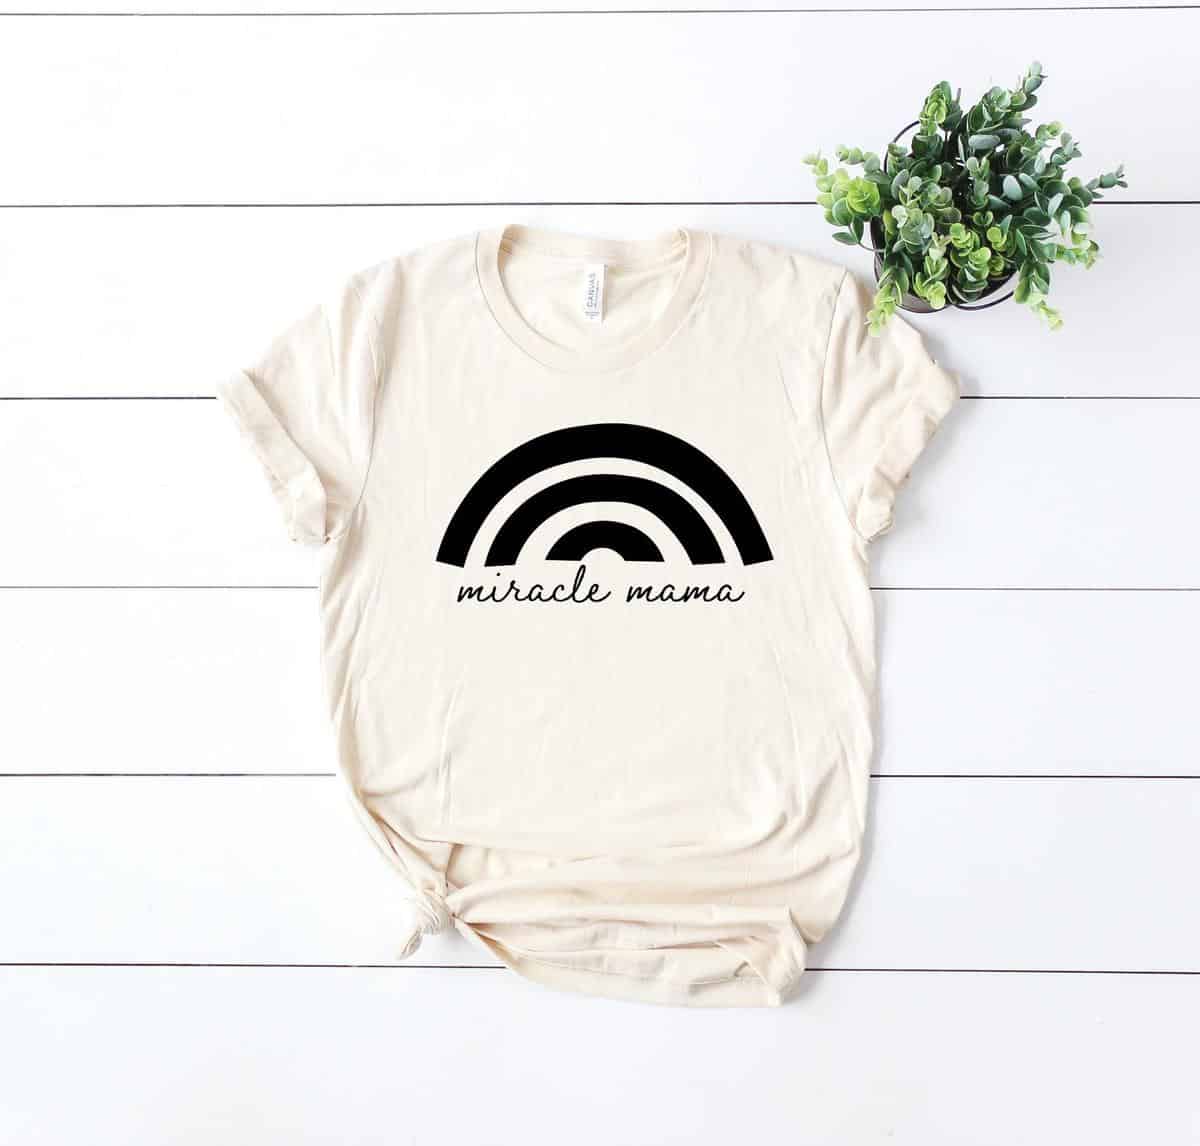 cream-tee-shirt-that-says-miracle-mama-with-rainbow-on-top-this-is-a-great-rainbow-baby-gift